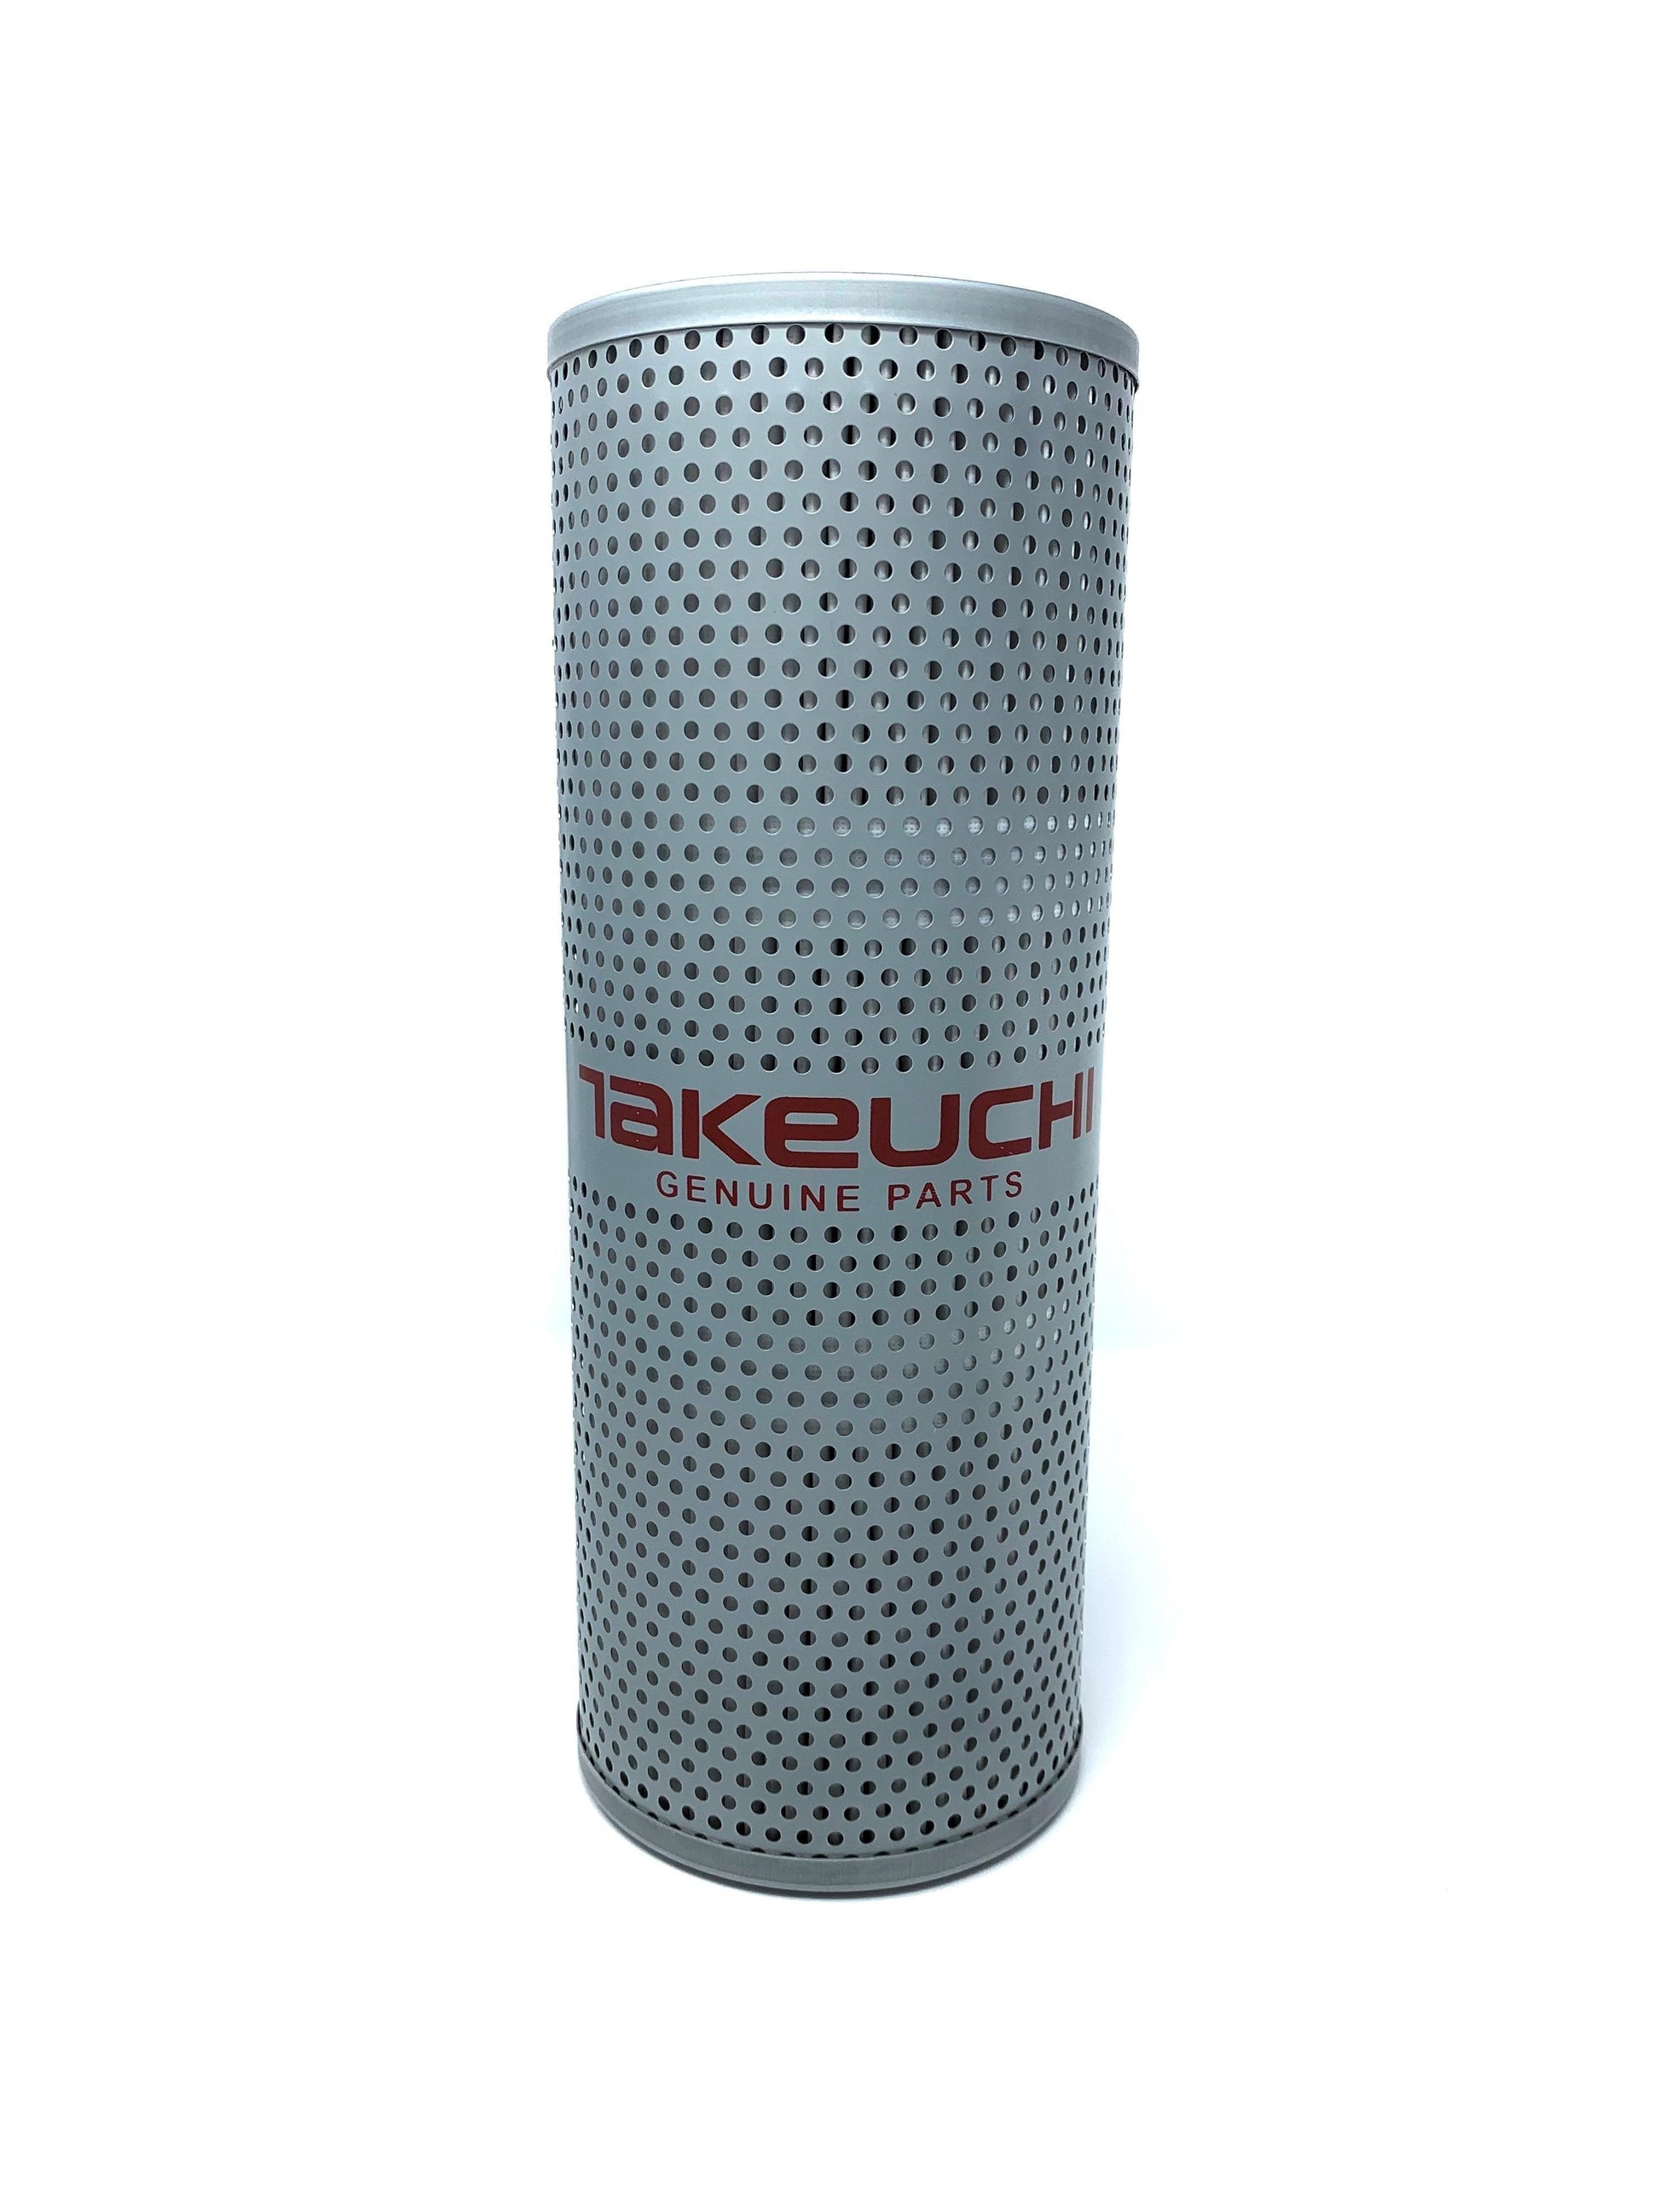 Takeuchi Hydraulic Filter - Part Number: 15511-03900